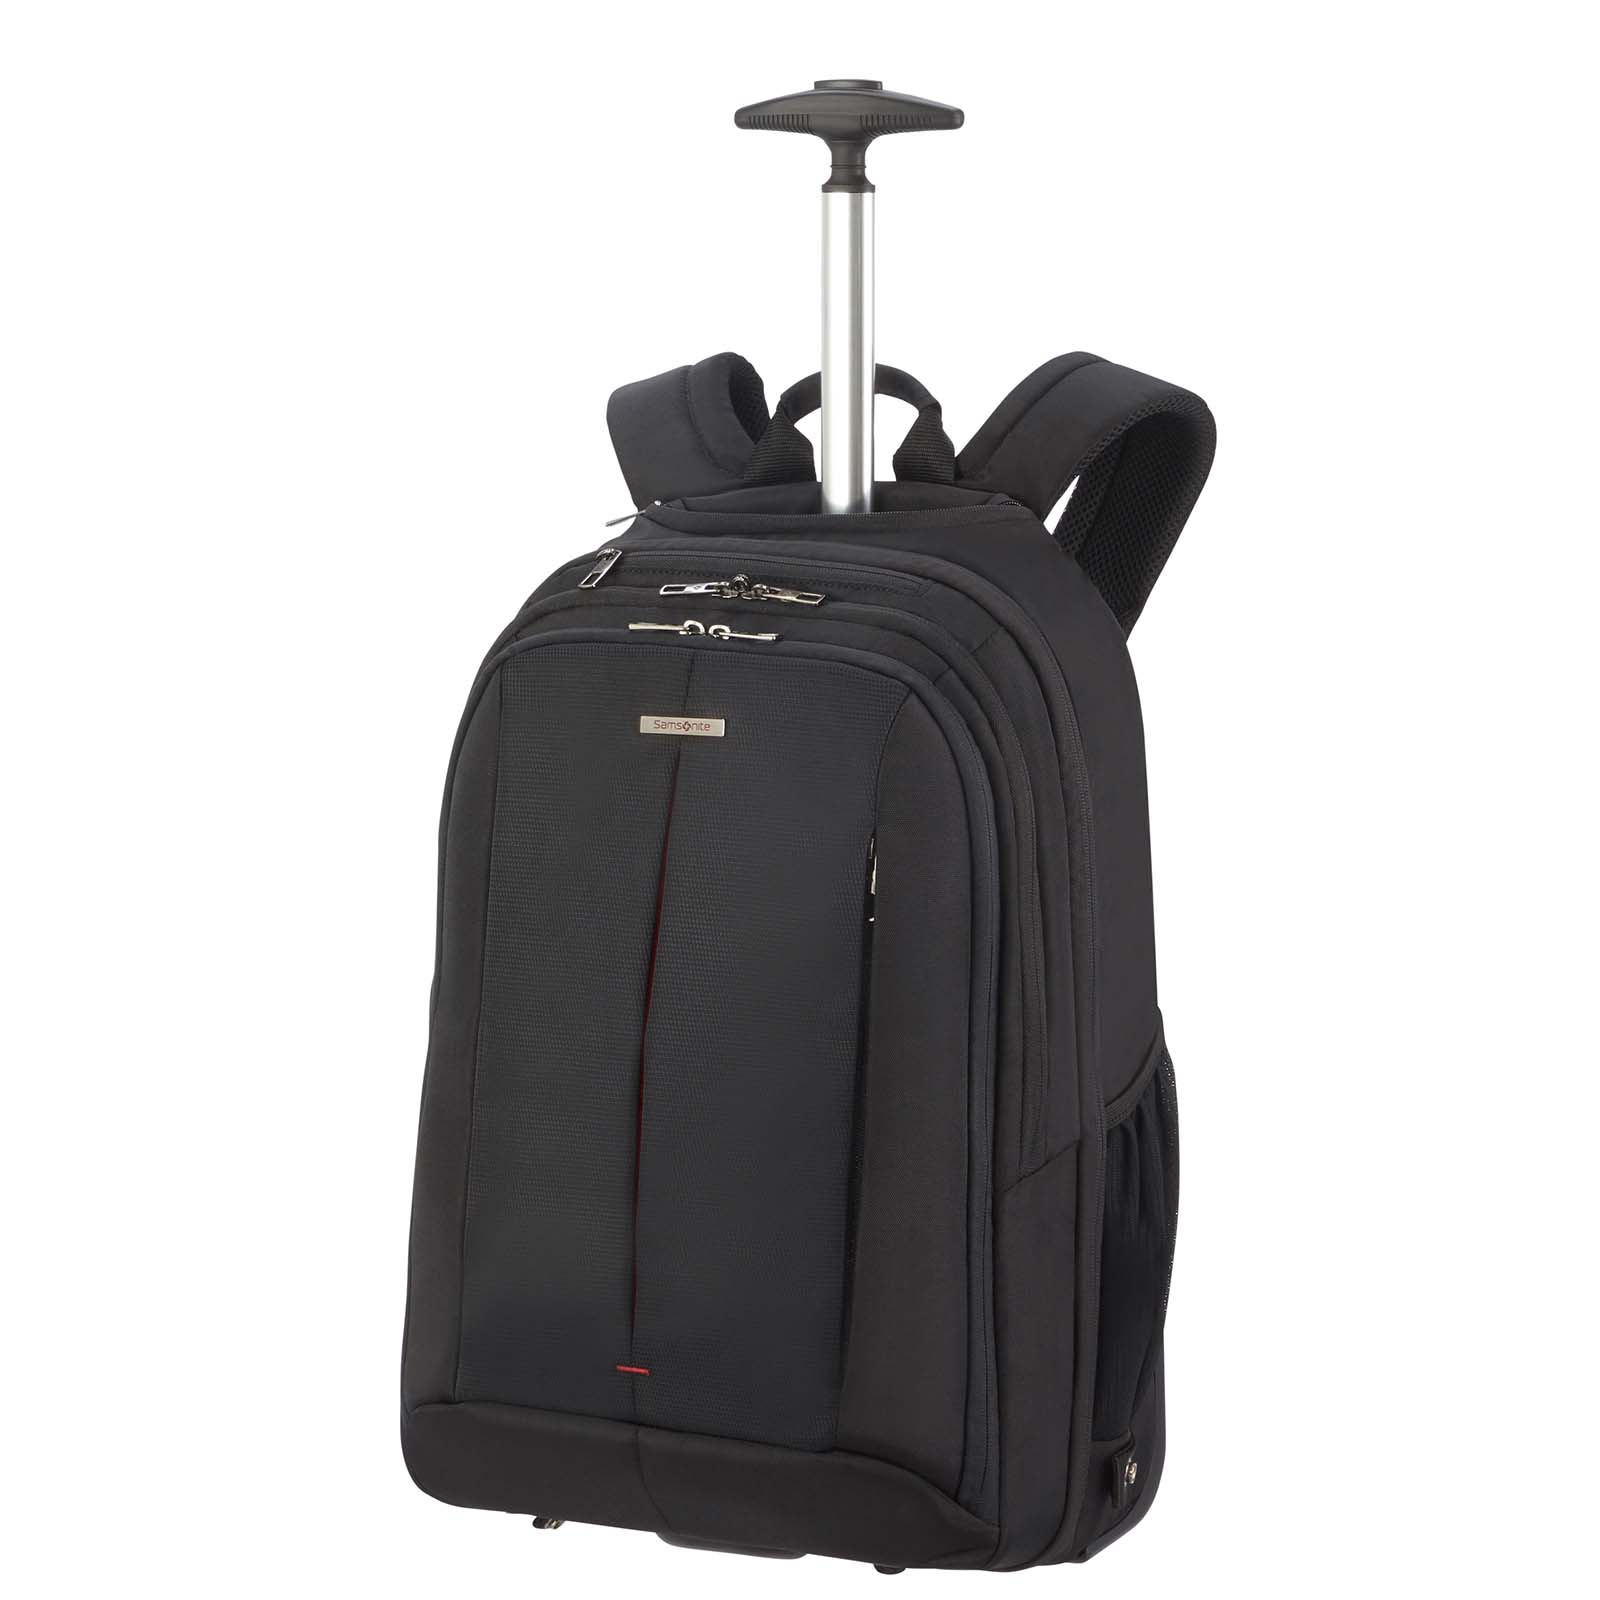 Samsonite-Guardit-2-17-Inch-Wheeled-Laptop-Backpack-Front-Angle